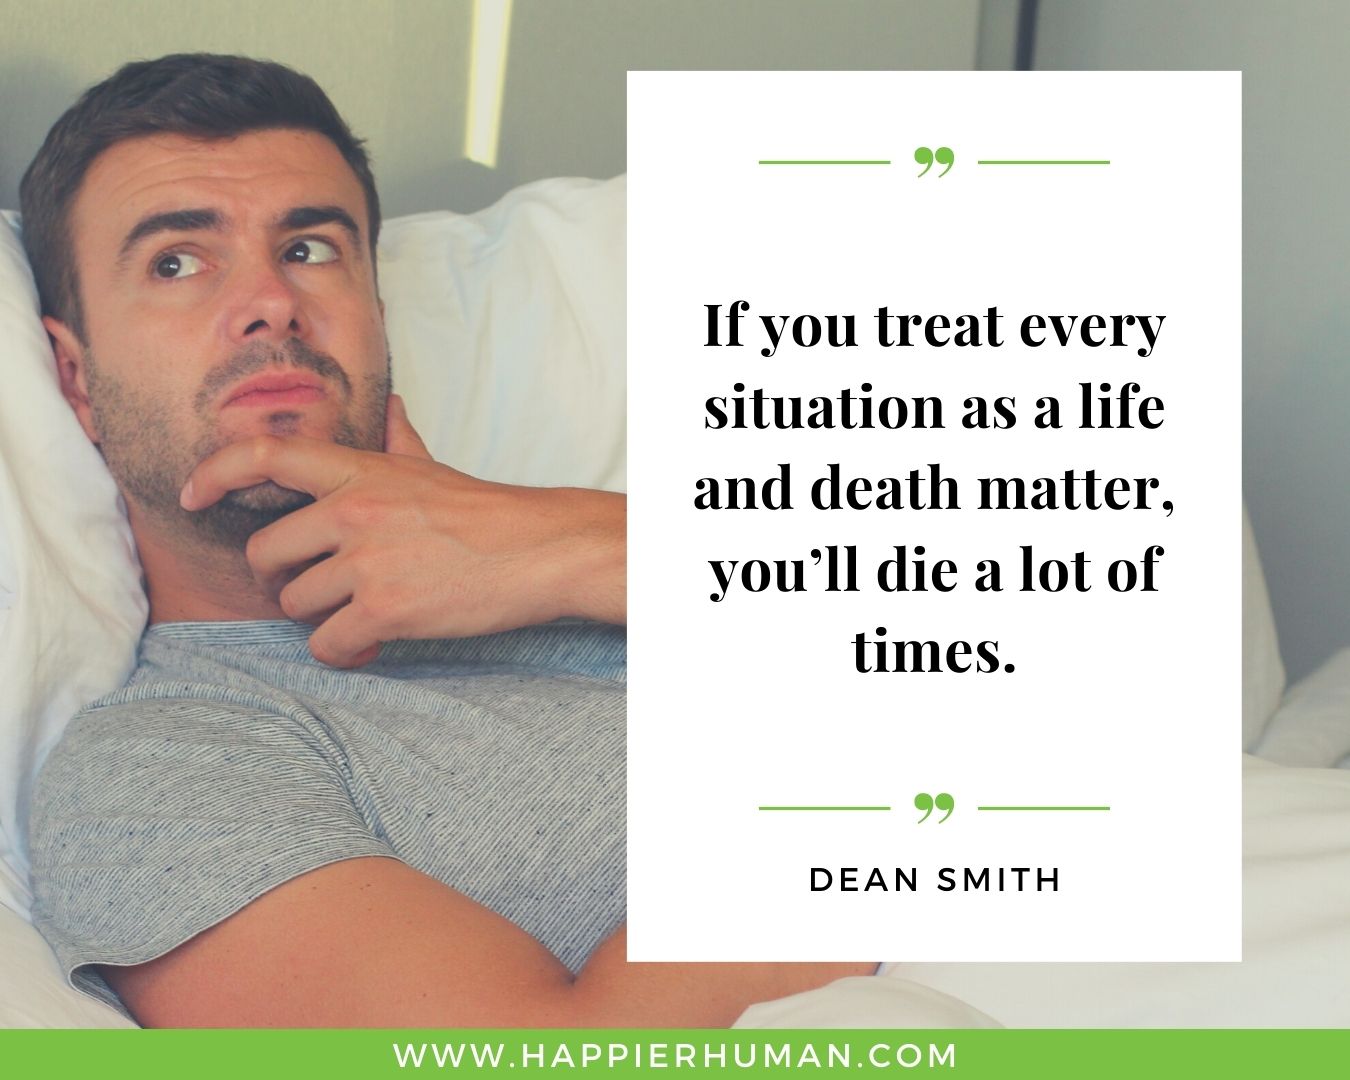 Overthinking Quotes - “If you treat every situation as a life and death matter, you’ll die a lot of times.” - Dean Smith